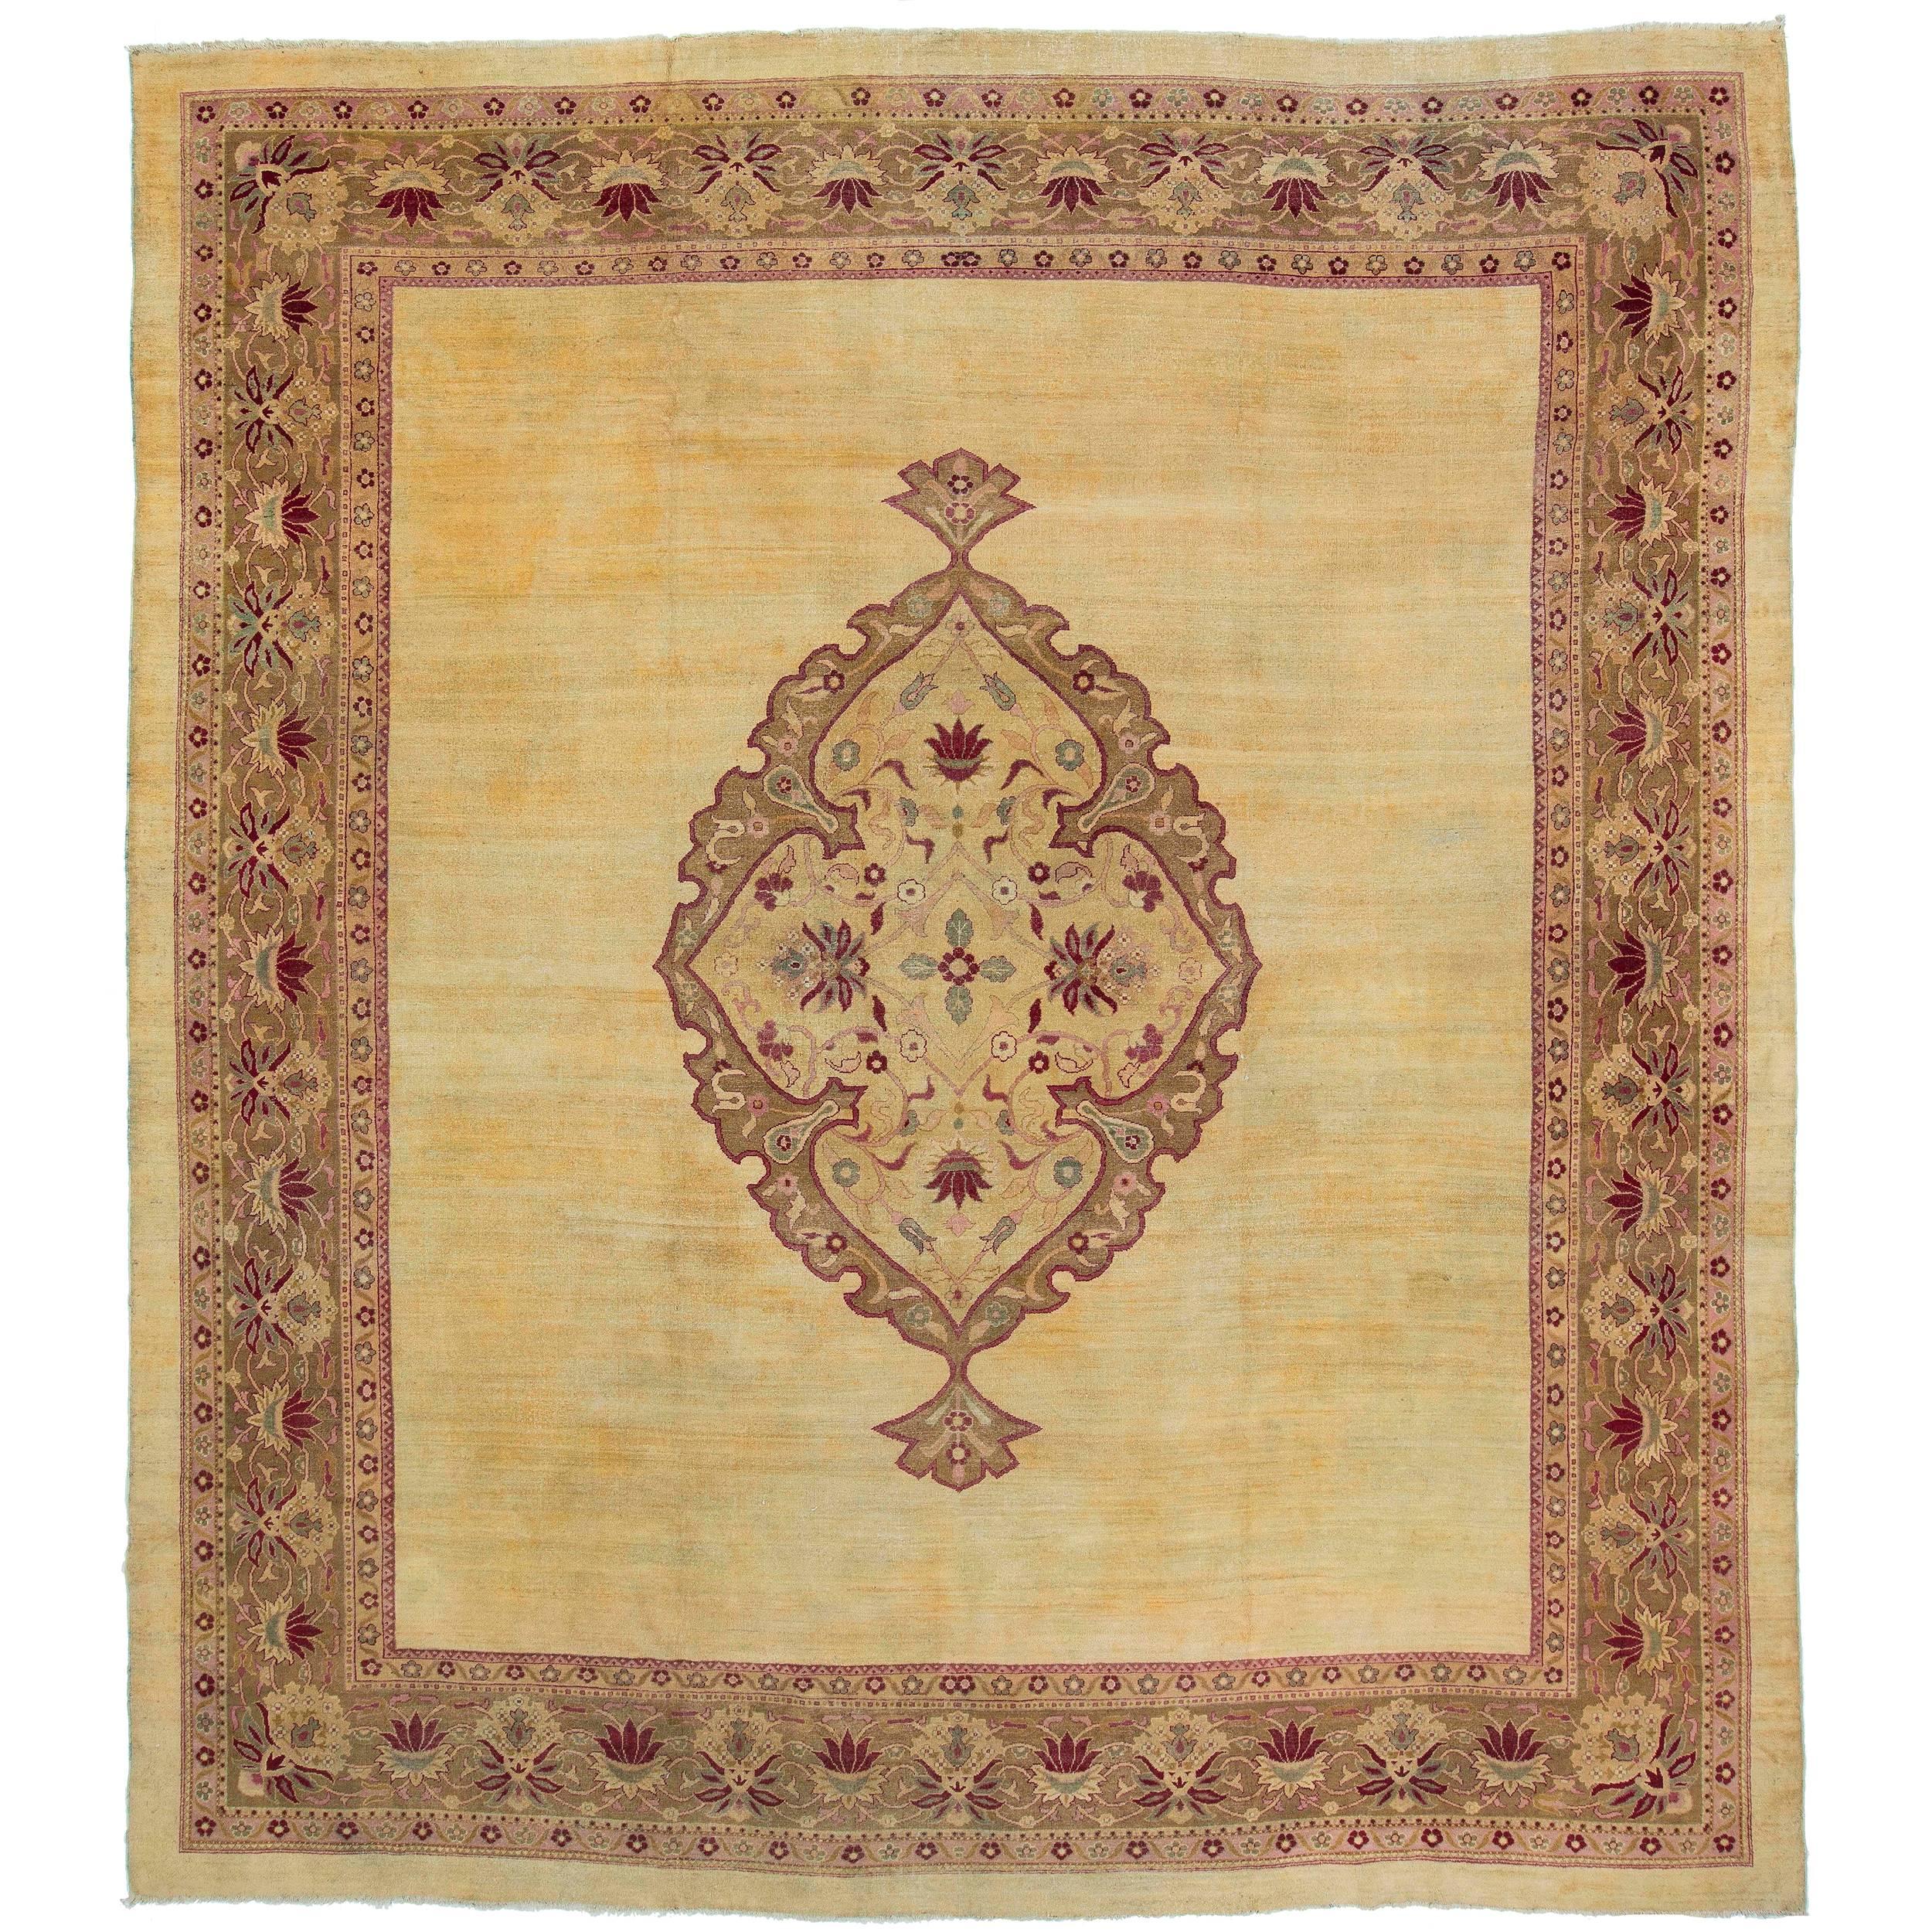 A dramatic and regal style Amritsar carpet from the northern Indian city. A gentle saffron background amplifies the use of burgundy reds and pinks drawn in Safavid influenced medallion. Measures: 13'10